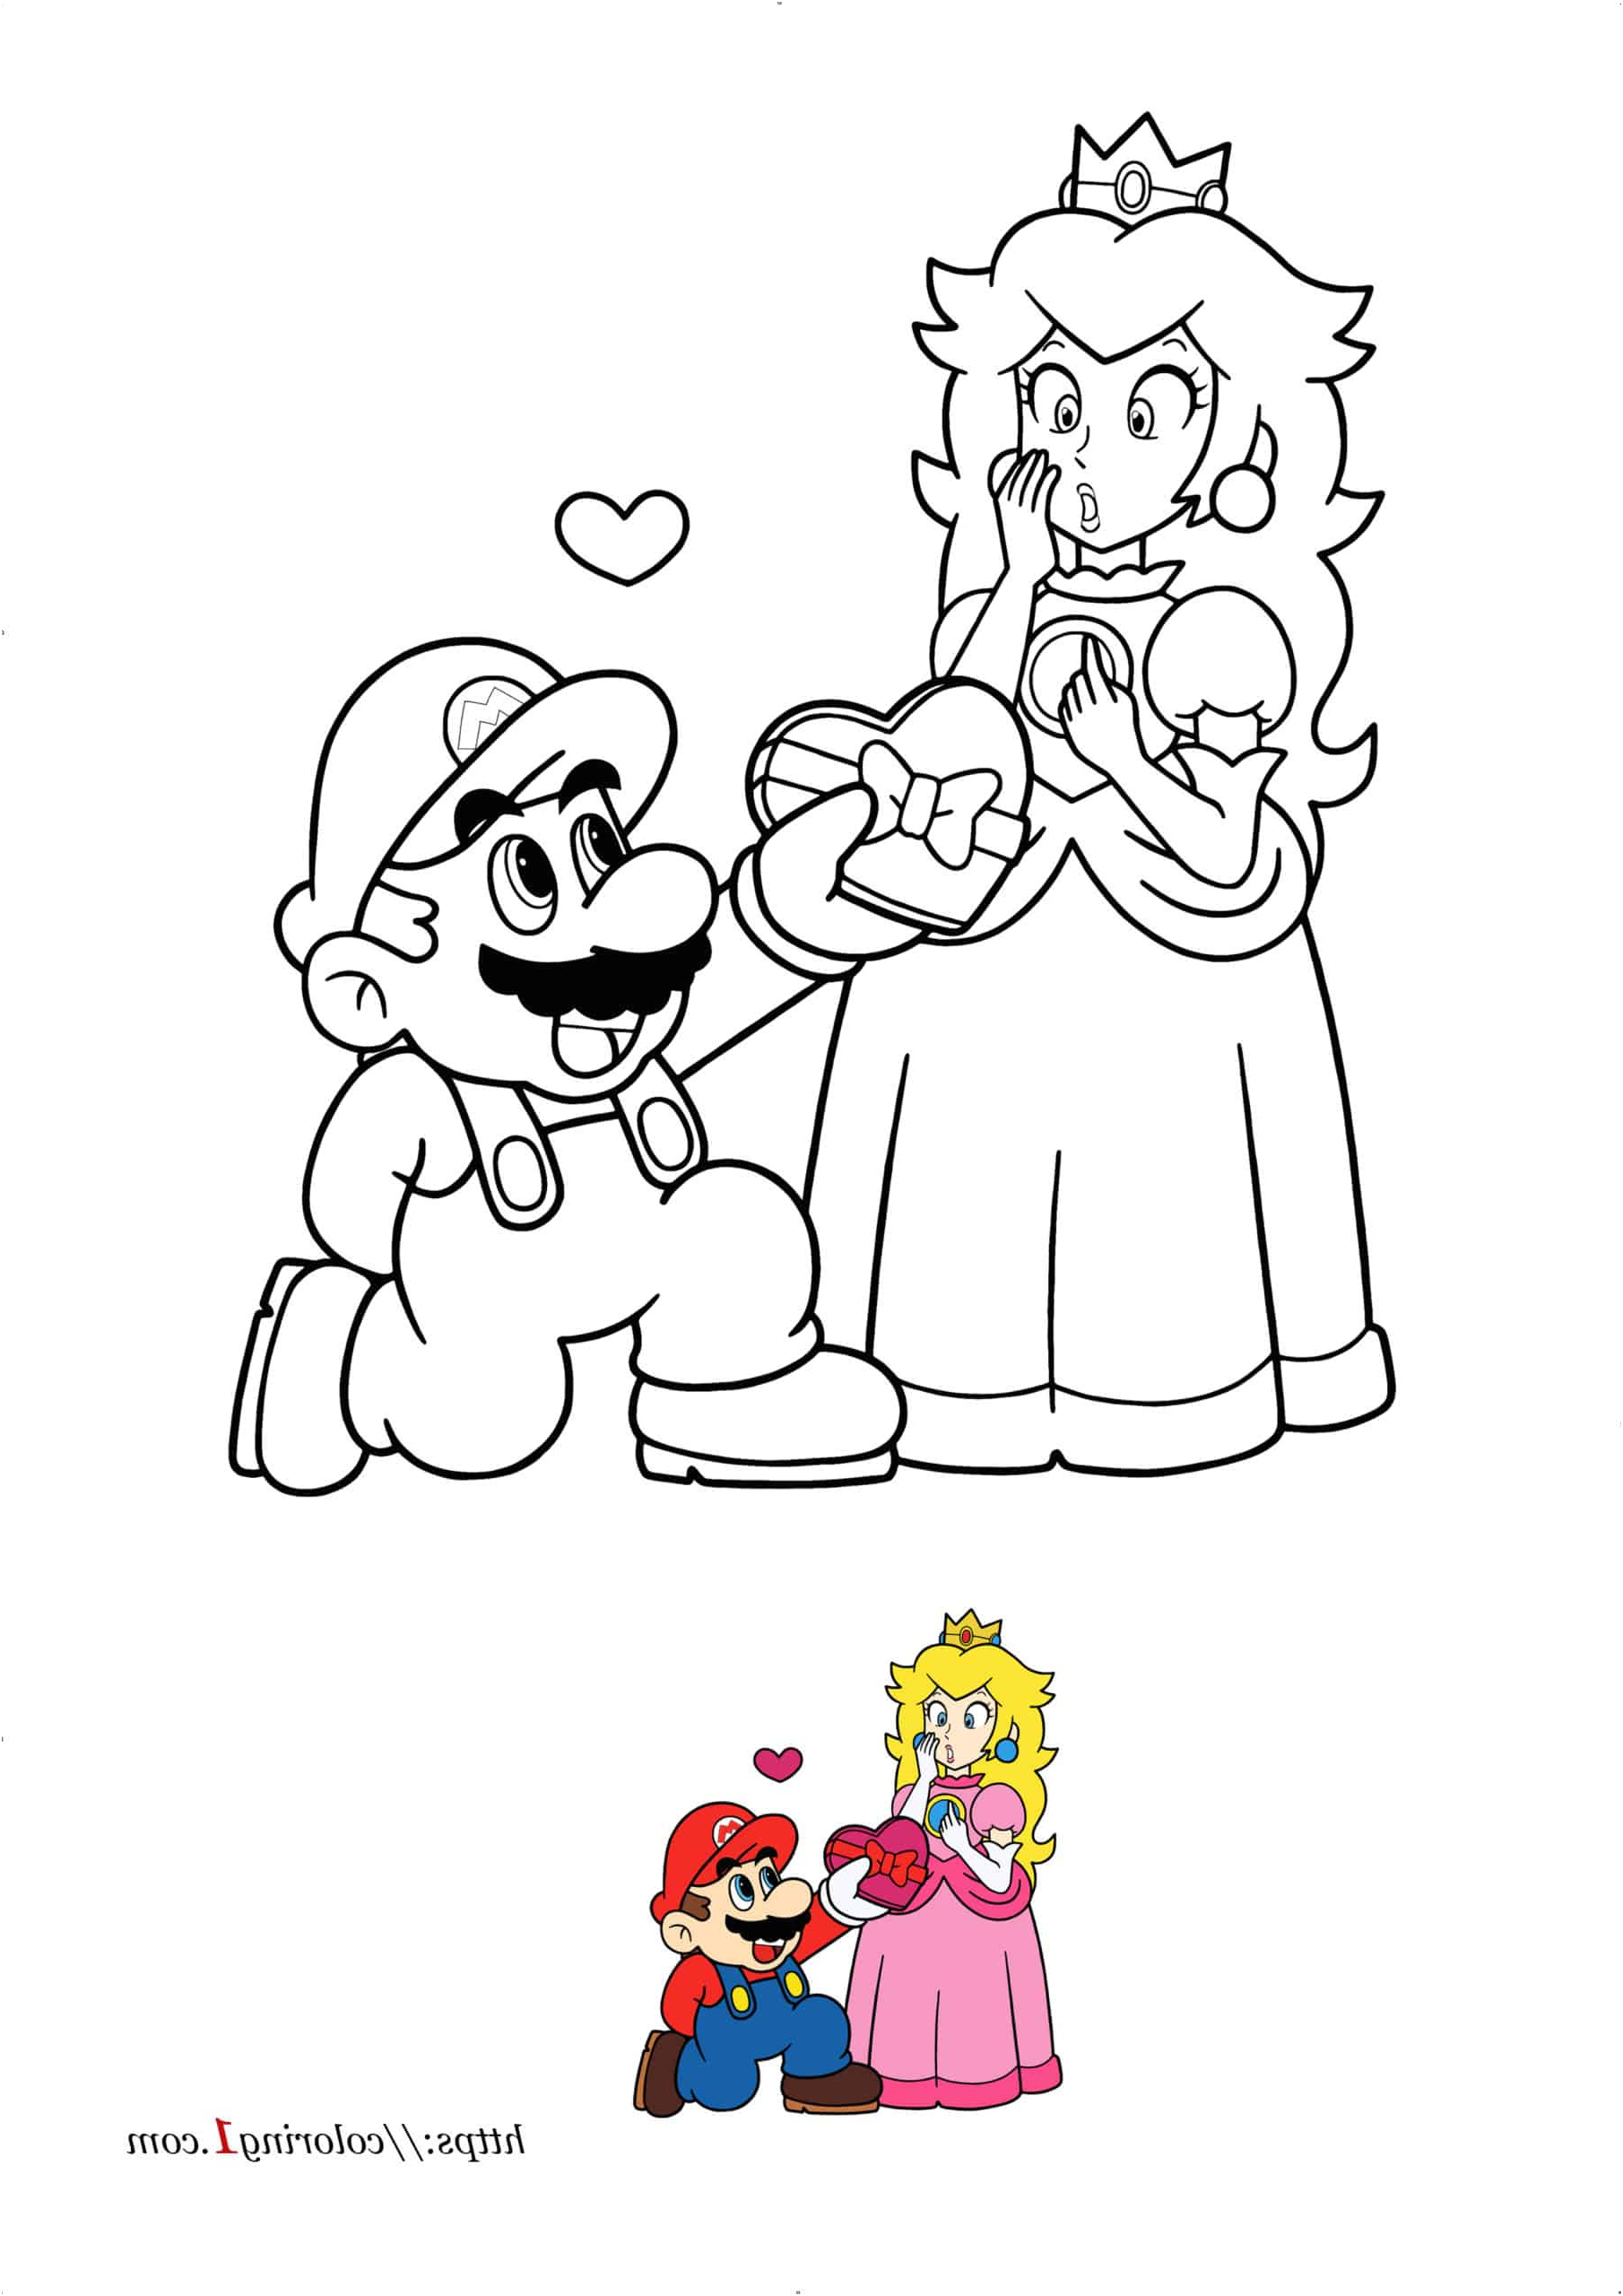 luigi and daisy coloring pages mario